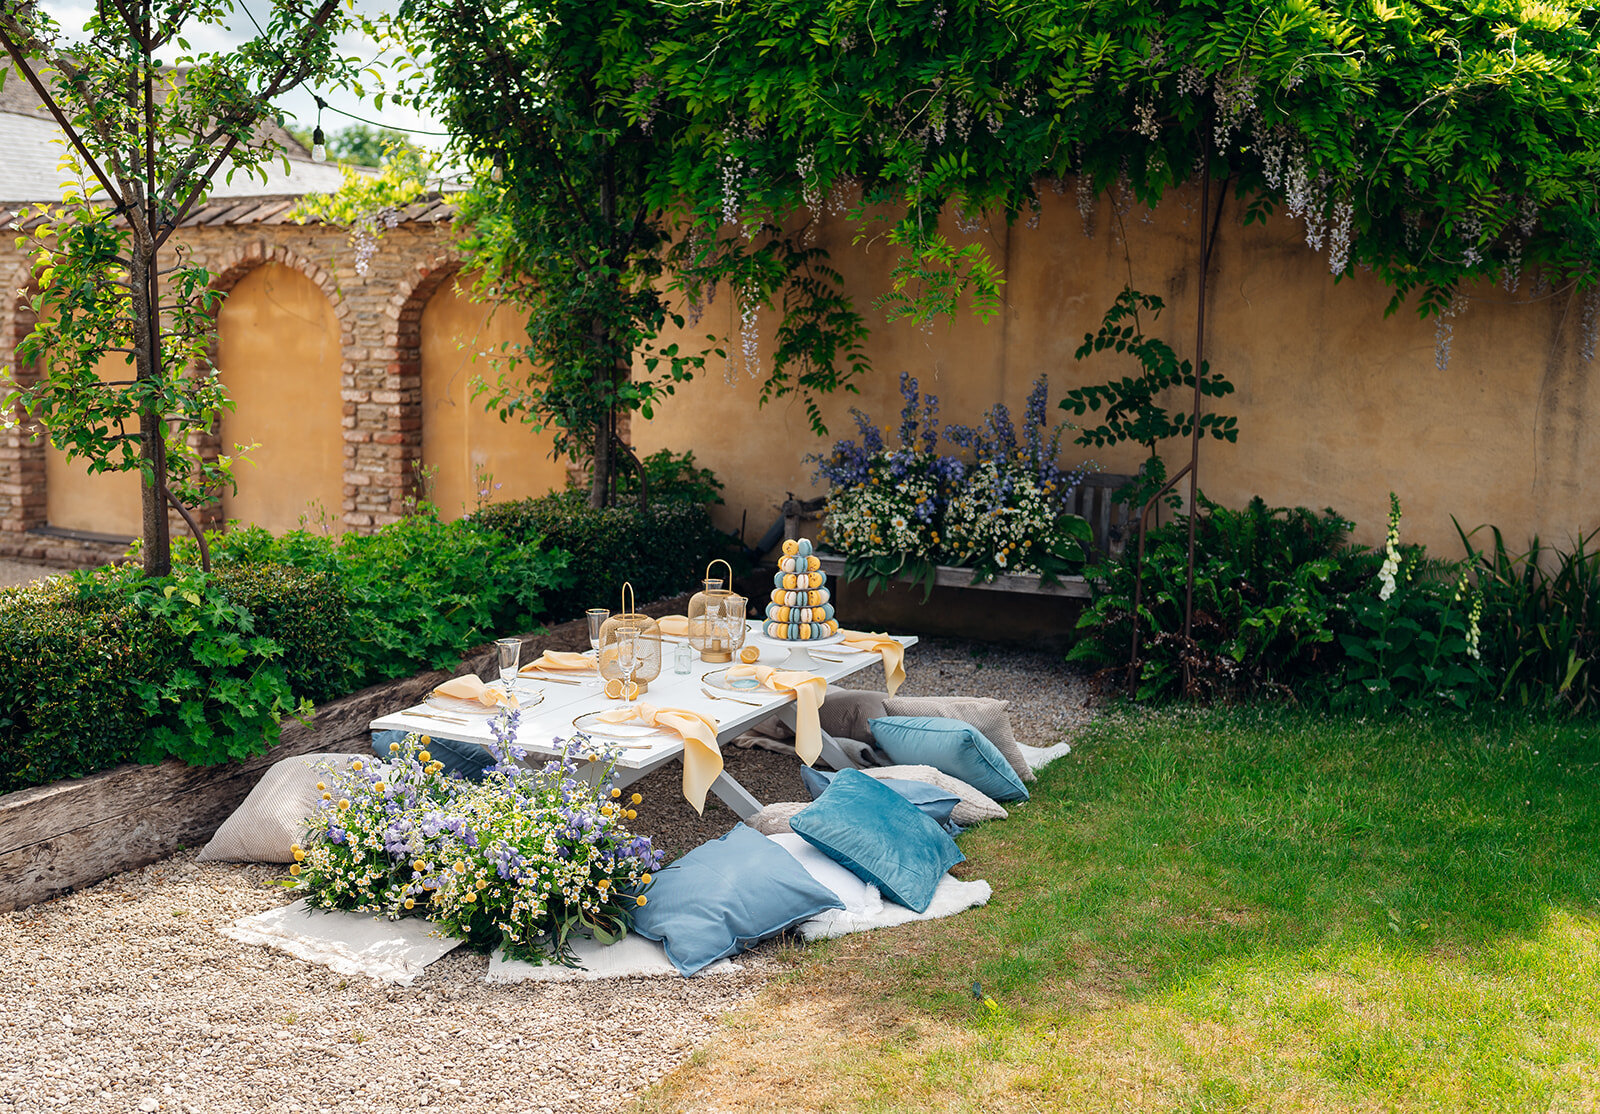 Picnic style wedding breakfast set up, with cushions, grazing boards, macaron tower and floral surrounding. Located at Oxleaze Barn, Cotswolds.